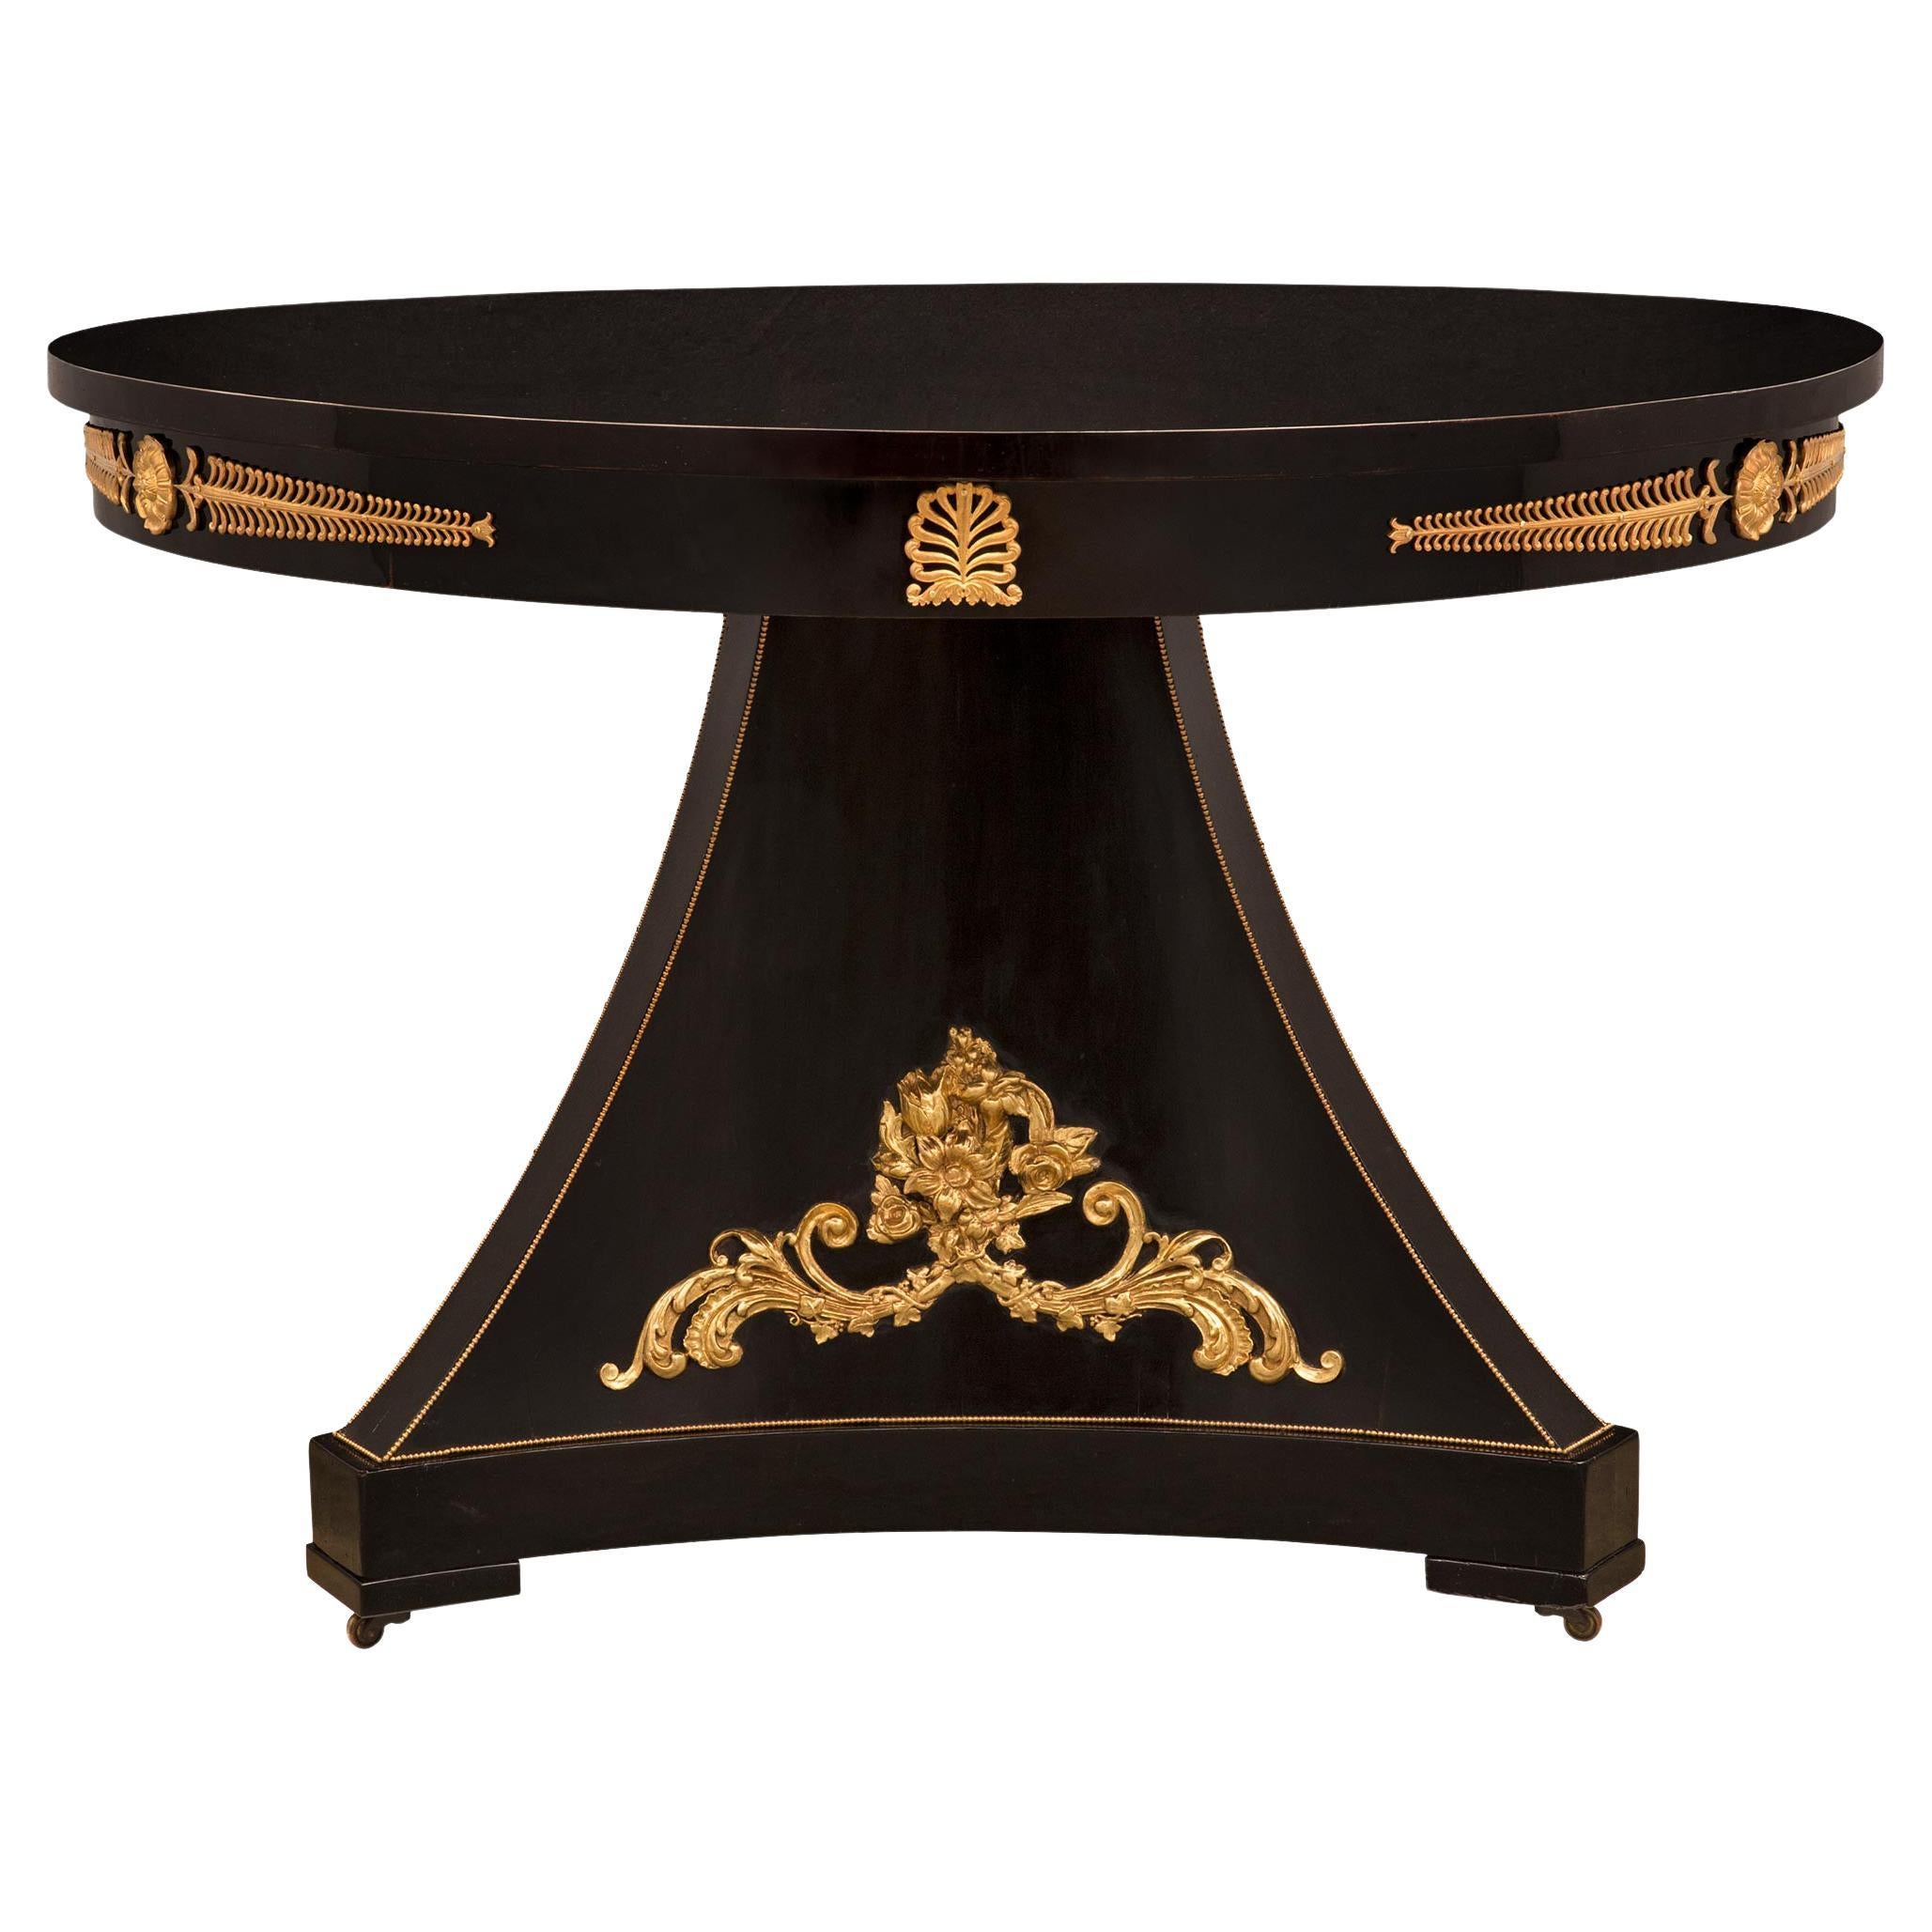 French 19th Century Napoleon III Period Ebony Ormolu and Giltwood Center Table For Sale